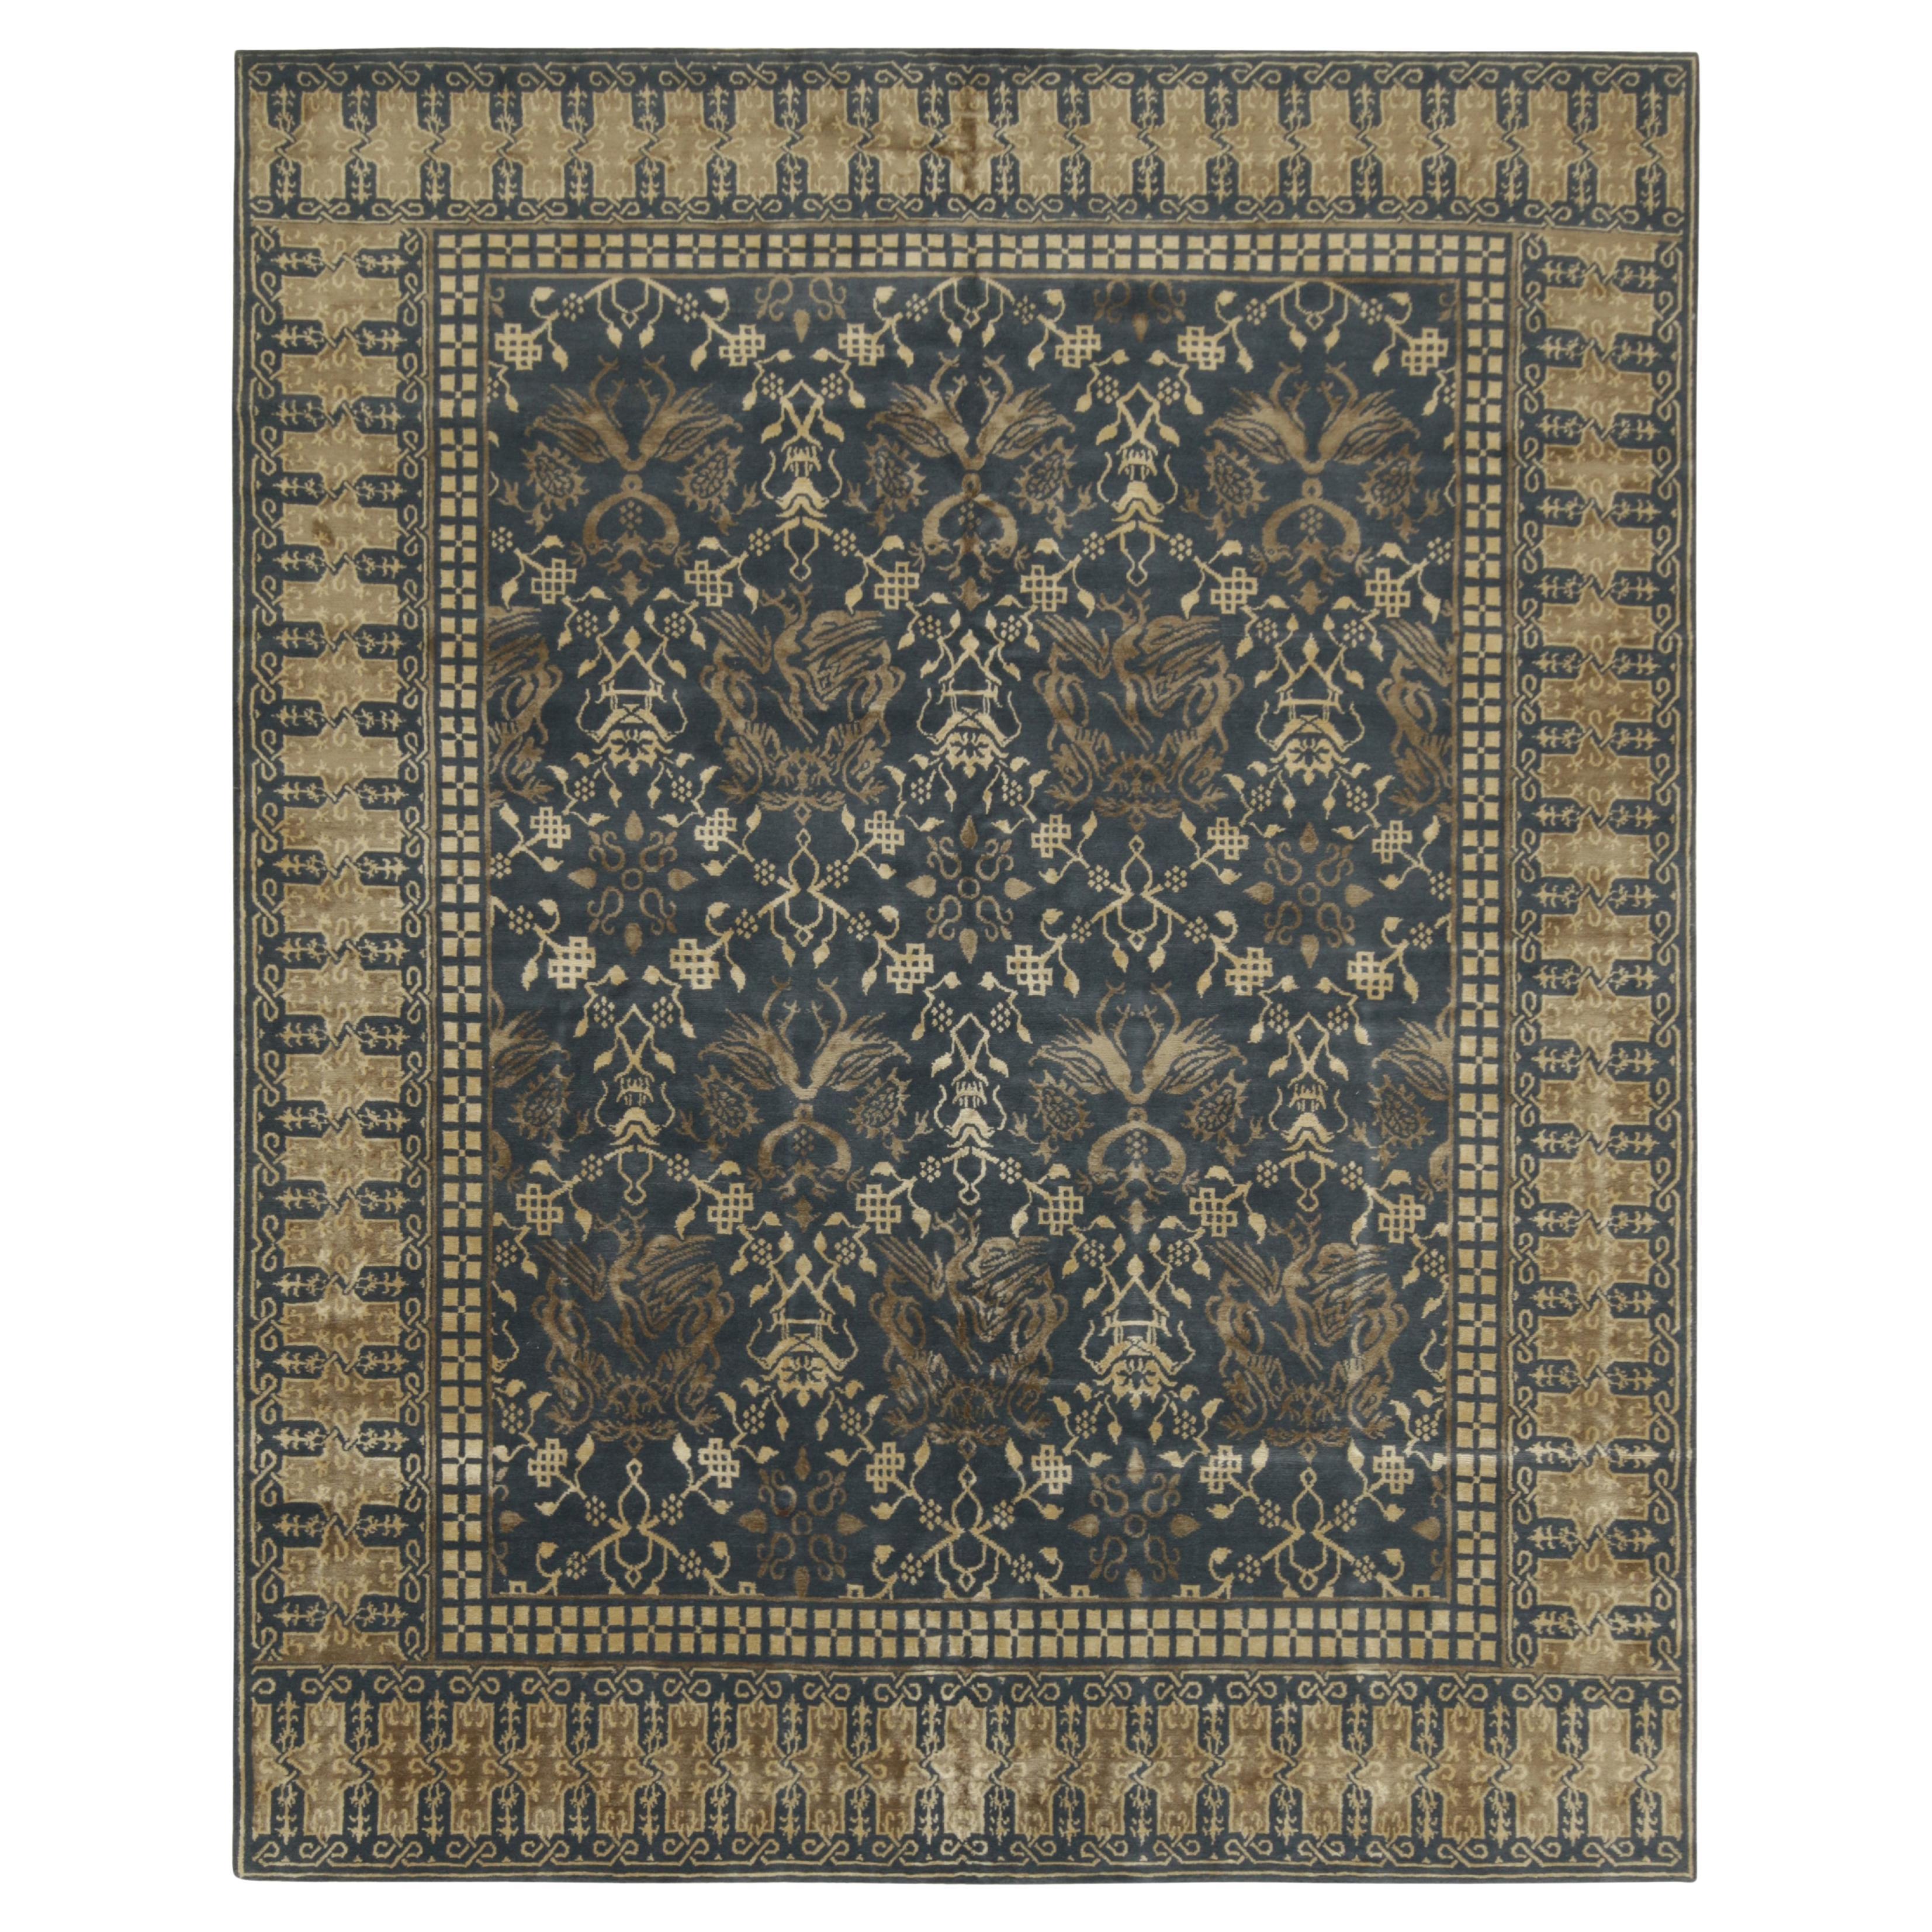 Rug & Kilim’s European style Pictorial rug in Blue with Gold Dragon Patterns